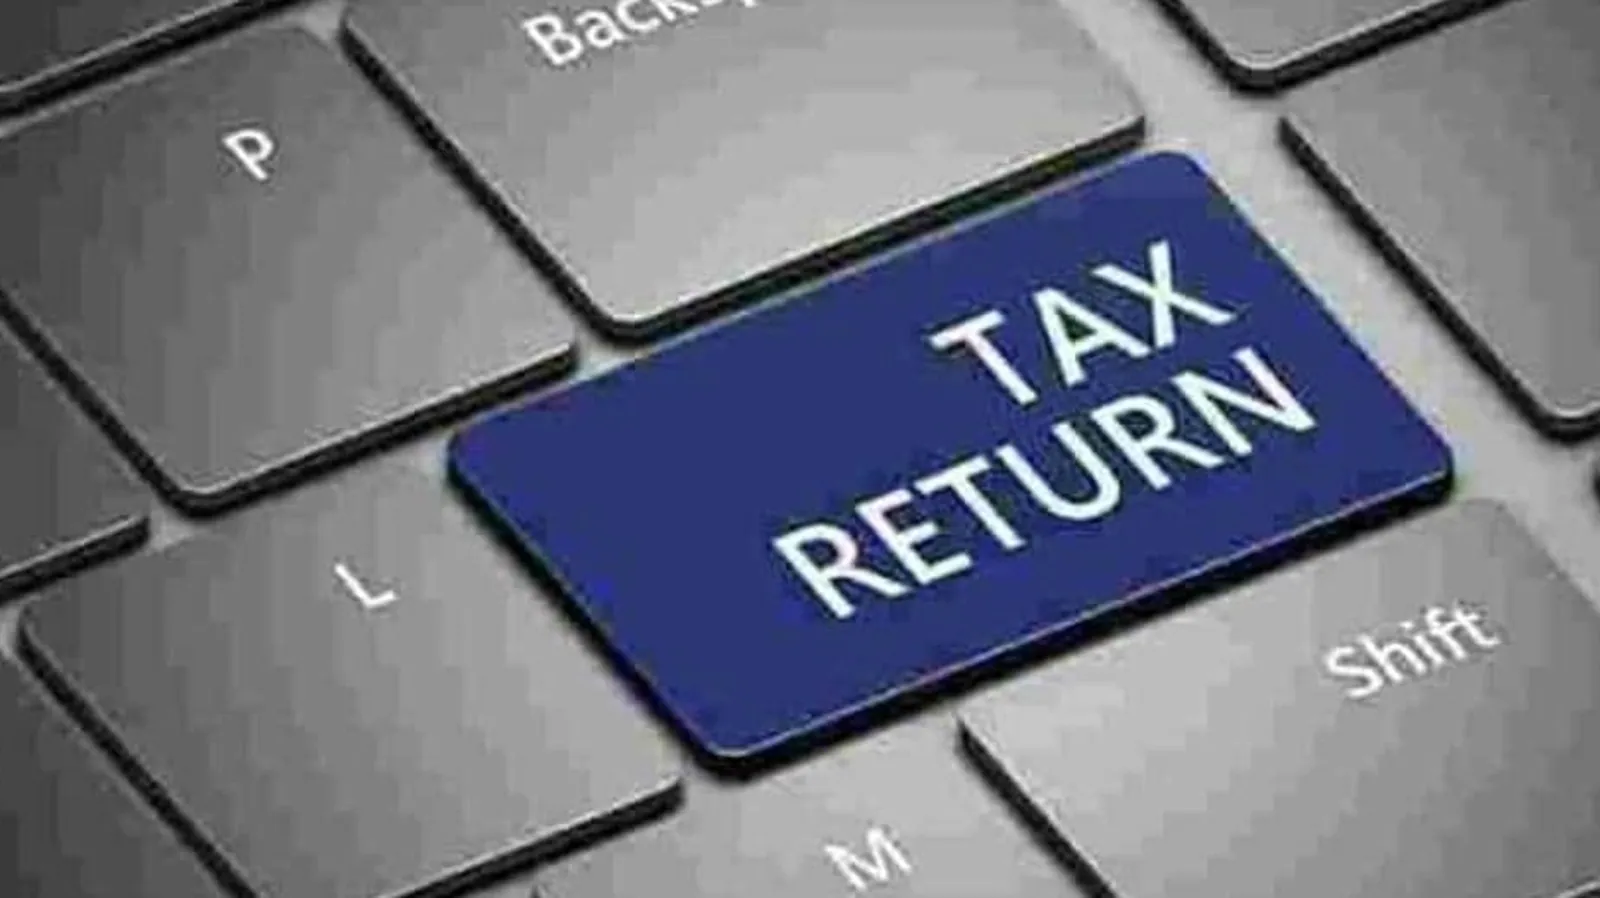 Did not file ITR by due date or made errors in tax return? Here’s what you can do